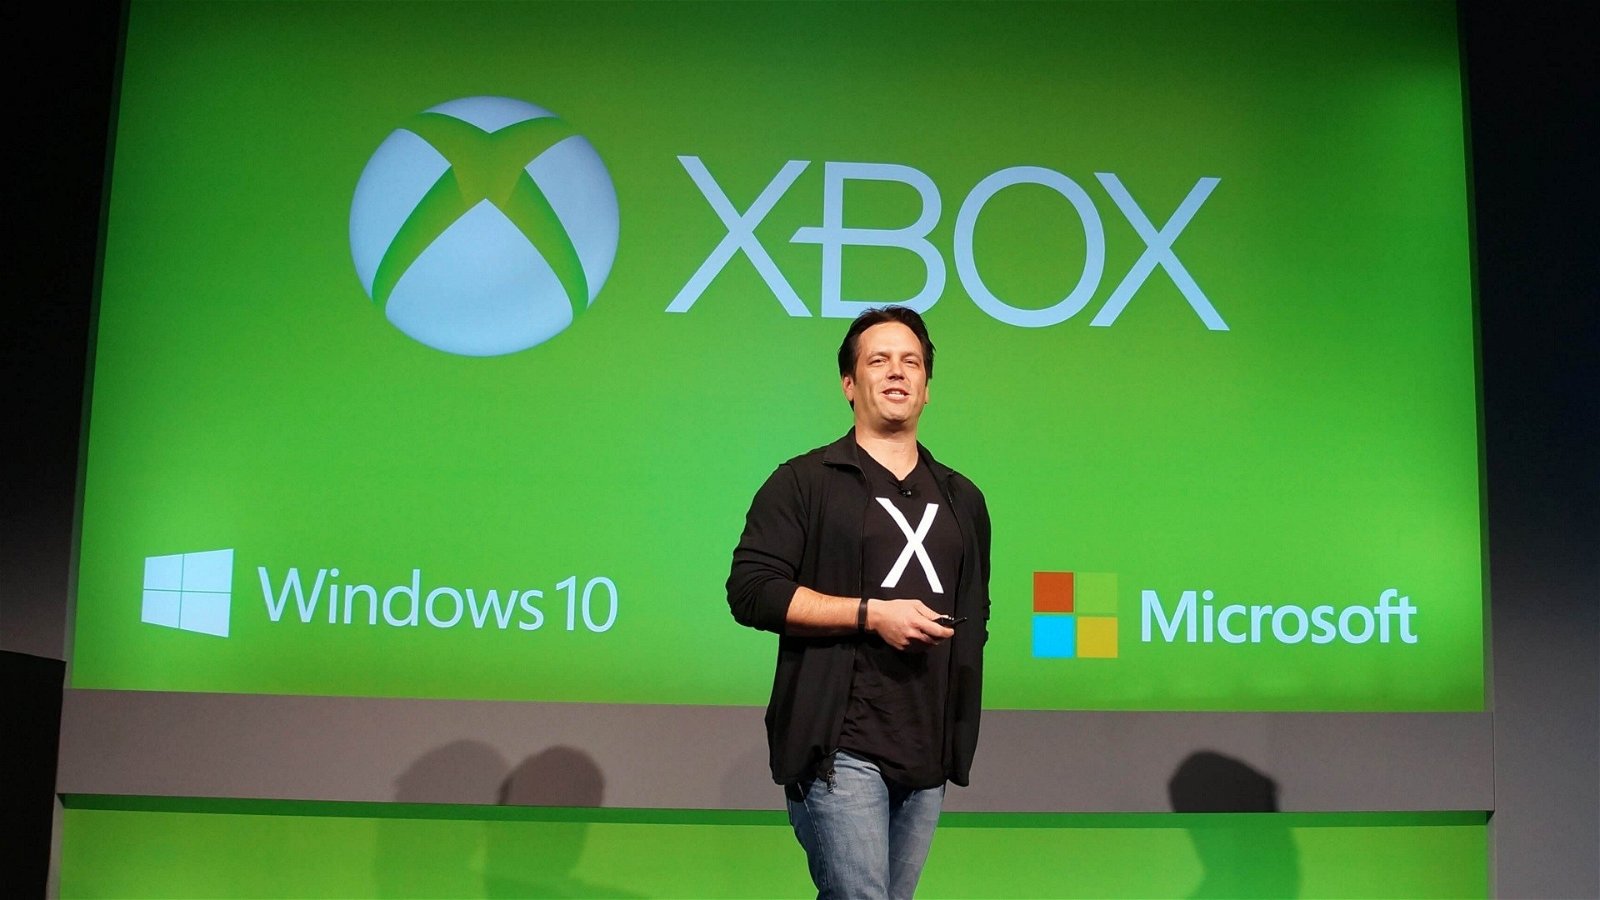 Xbox Executives Talk the Future of Gaming and Microsoft’s xCloud Service